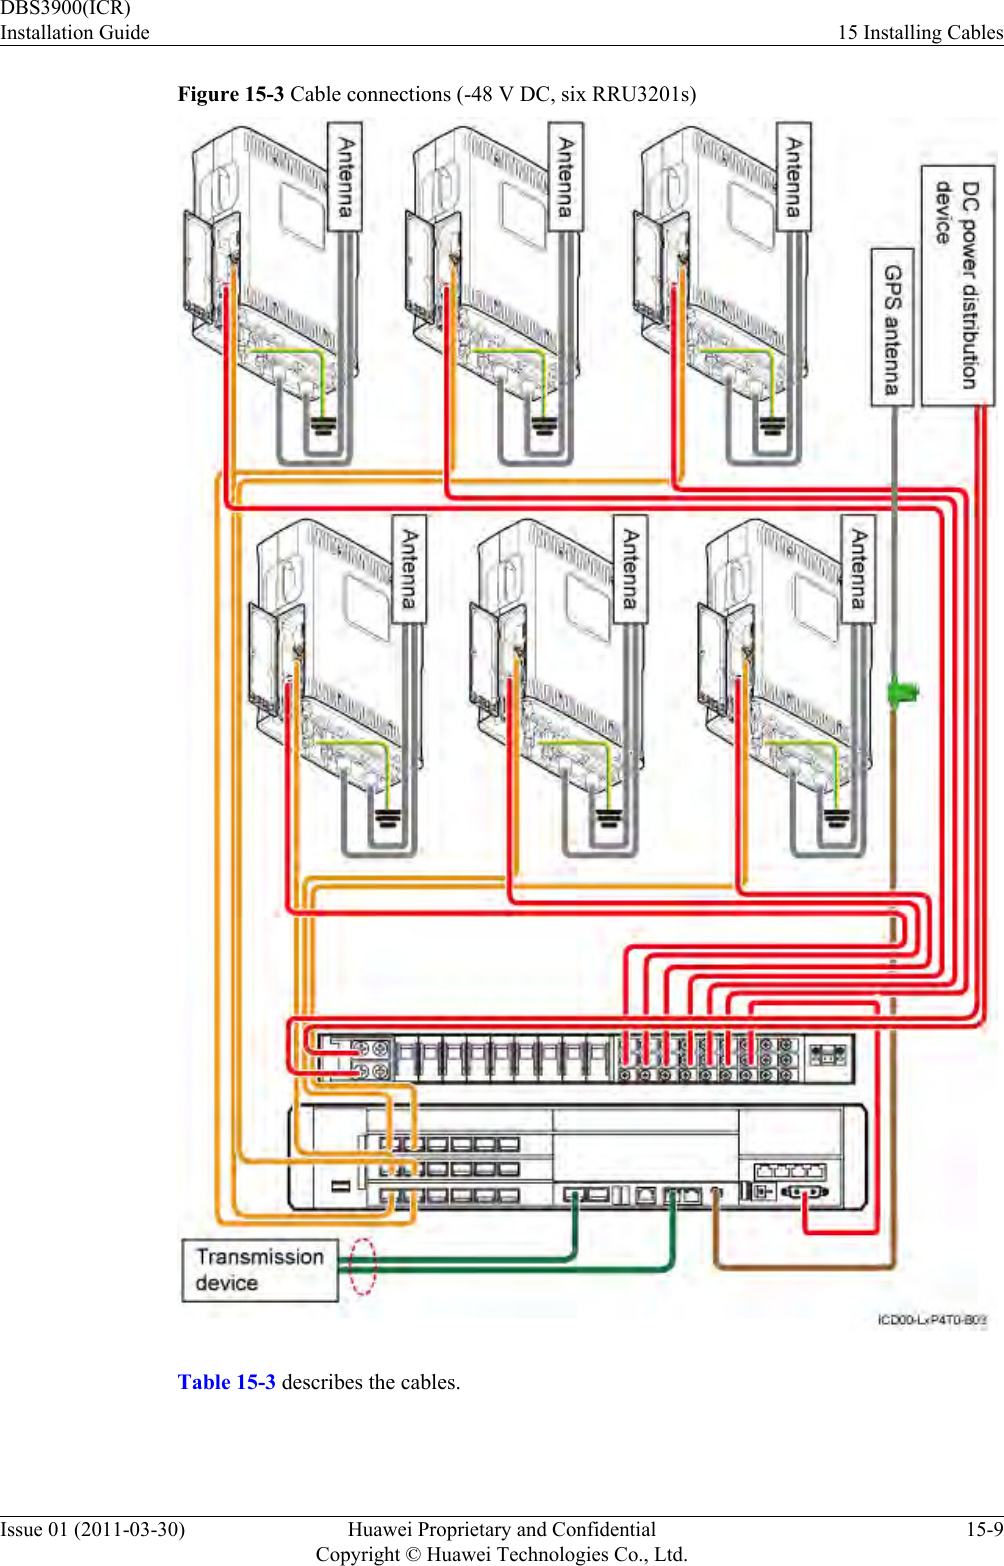 Figure 15-3 Cable connections (-48 V DC, six RRU3201s)Table 15-3 describes the cables.DBS3900(ICR)Installation Guide 15 Installing CablesIssue 01 (2011-03-30) Huawei Proprietary and ConfidentialCopyright © Huawei Technologies Co., Ltd.15-9